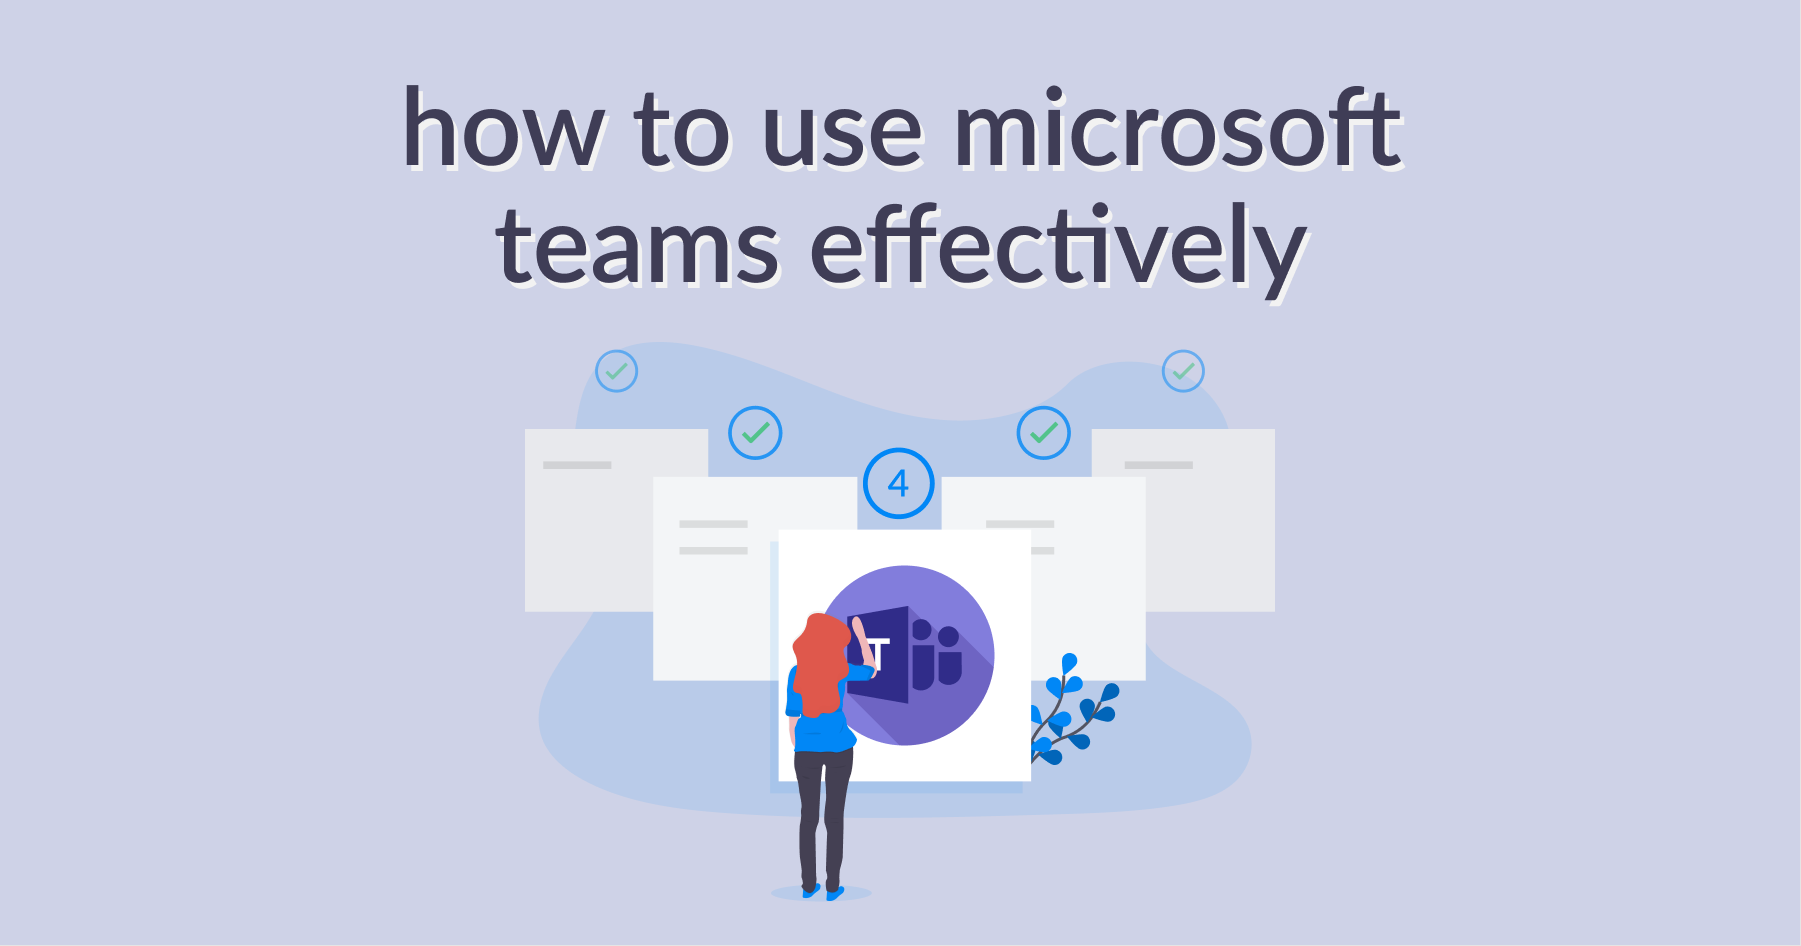 How to Use Microsoft Teams Effectively Guide 4: Other Services